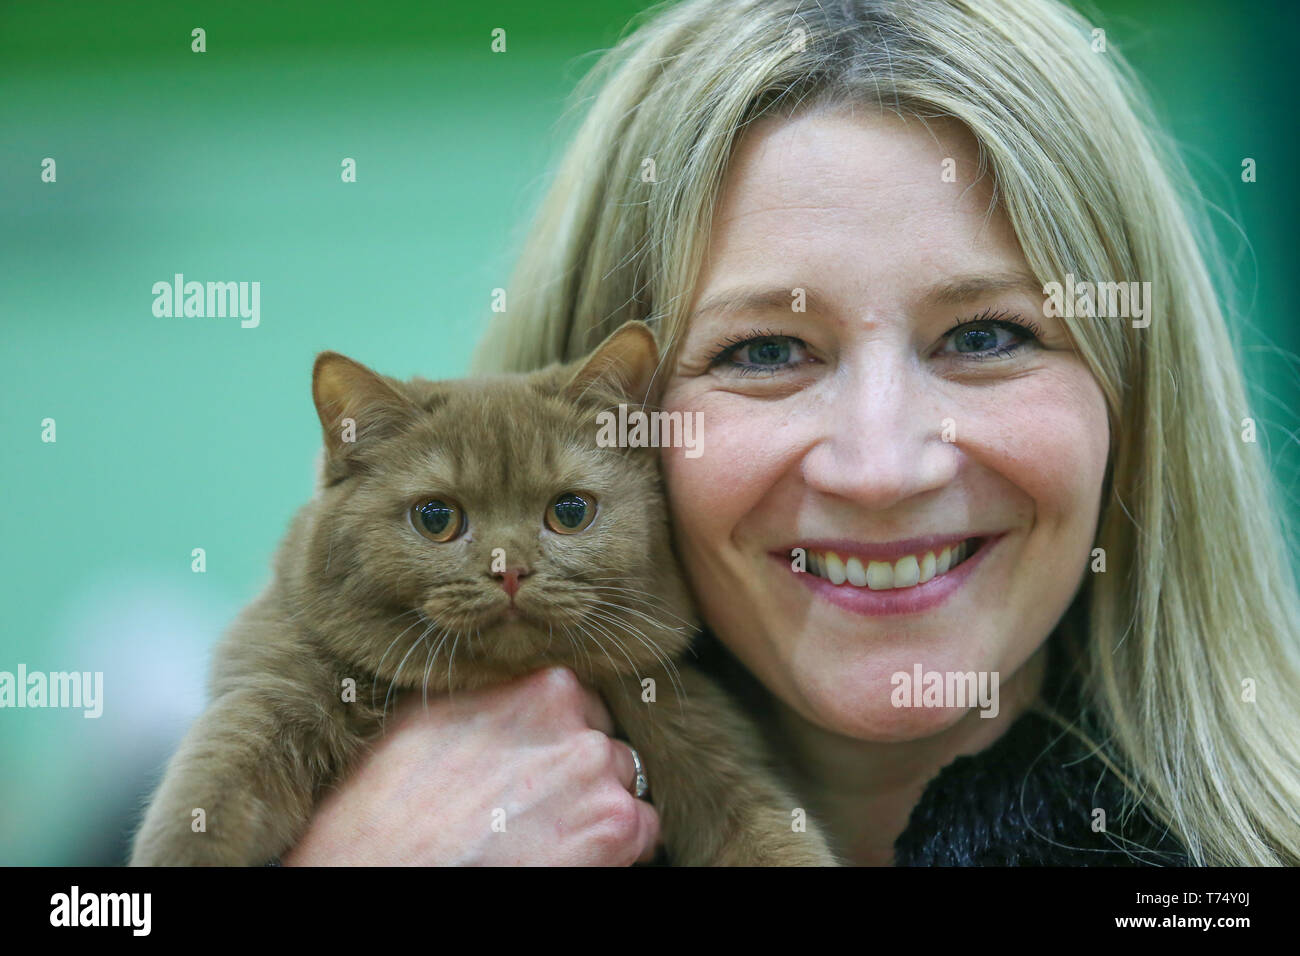 Worcester, UK. 4th May, 2019. 'Autumn' a British Short Hair is held by owner Eline Thomas at the GCCF Cat Show held at Worcester. Peter Lopeman/Alamy Live News Stock Photo